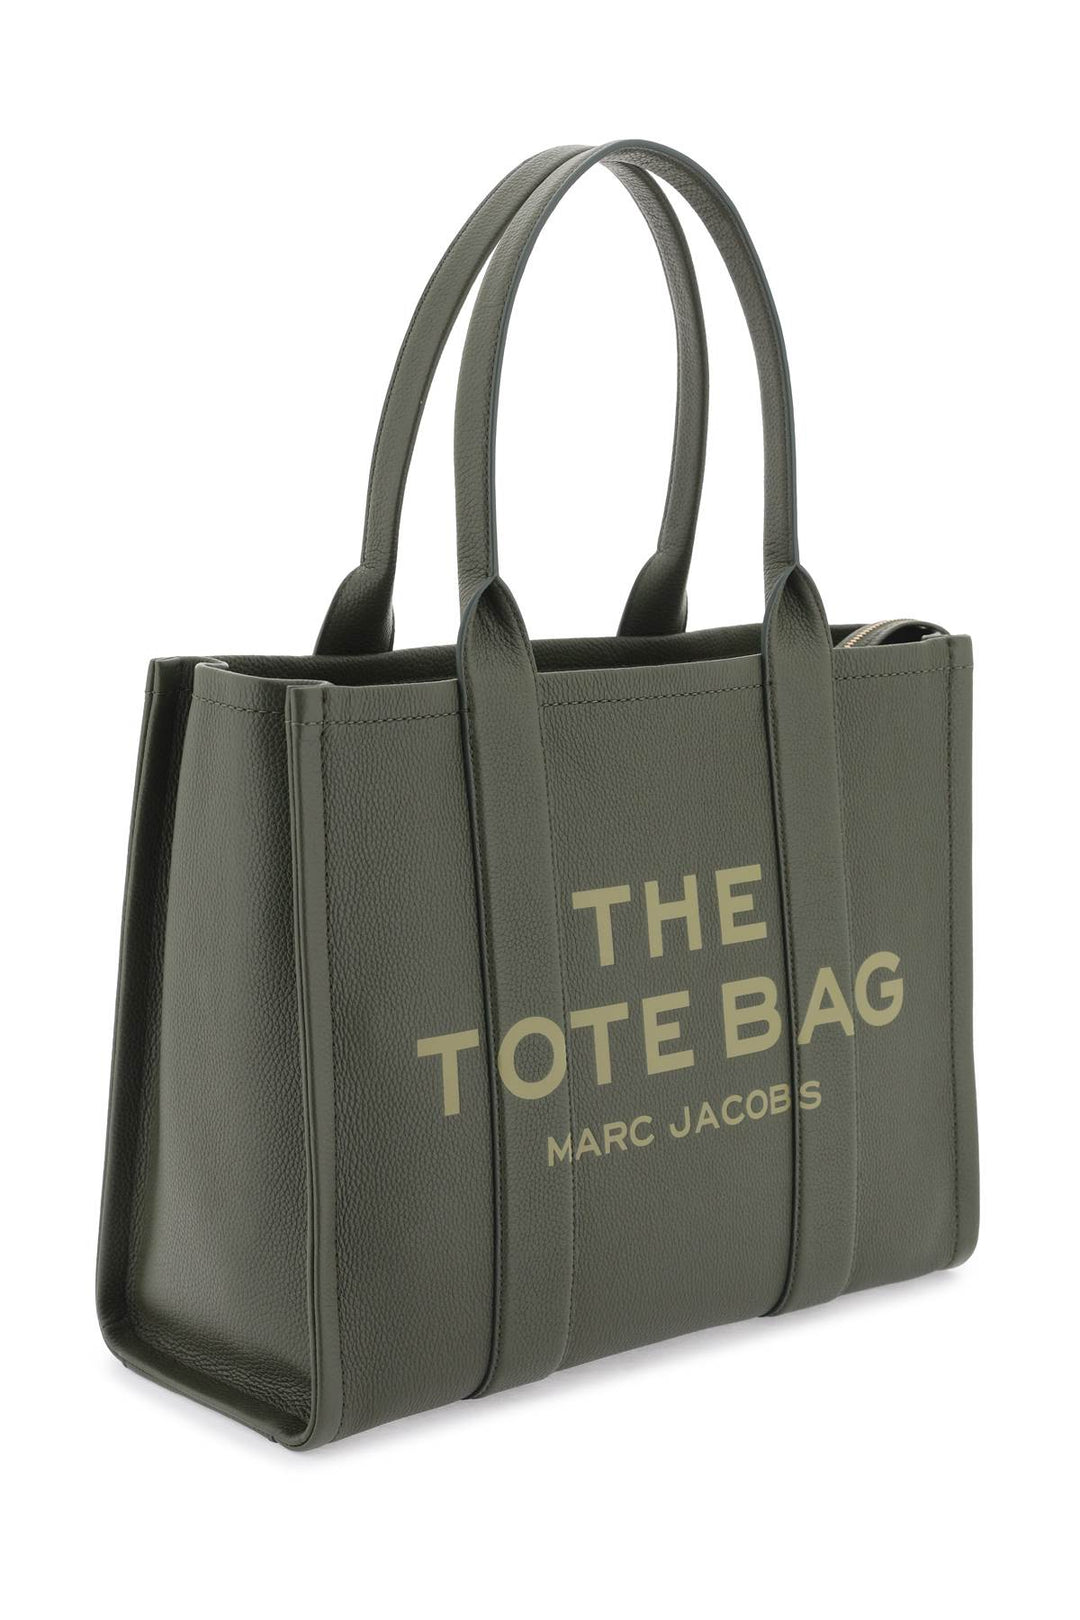 Marc Jacobs The Leather Large Tote Bag   Verde